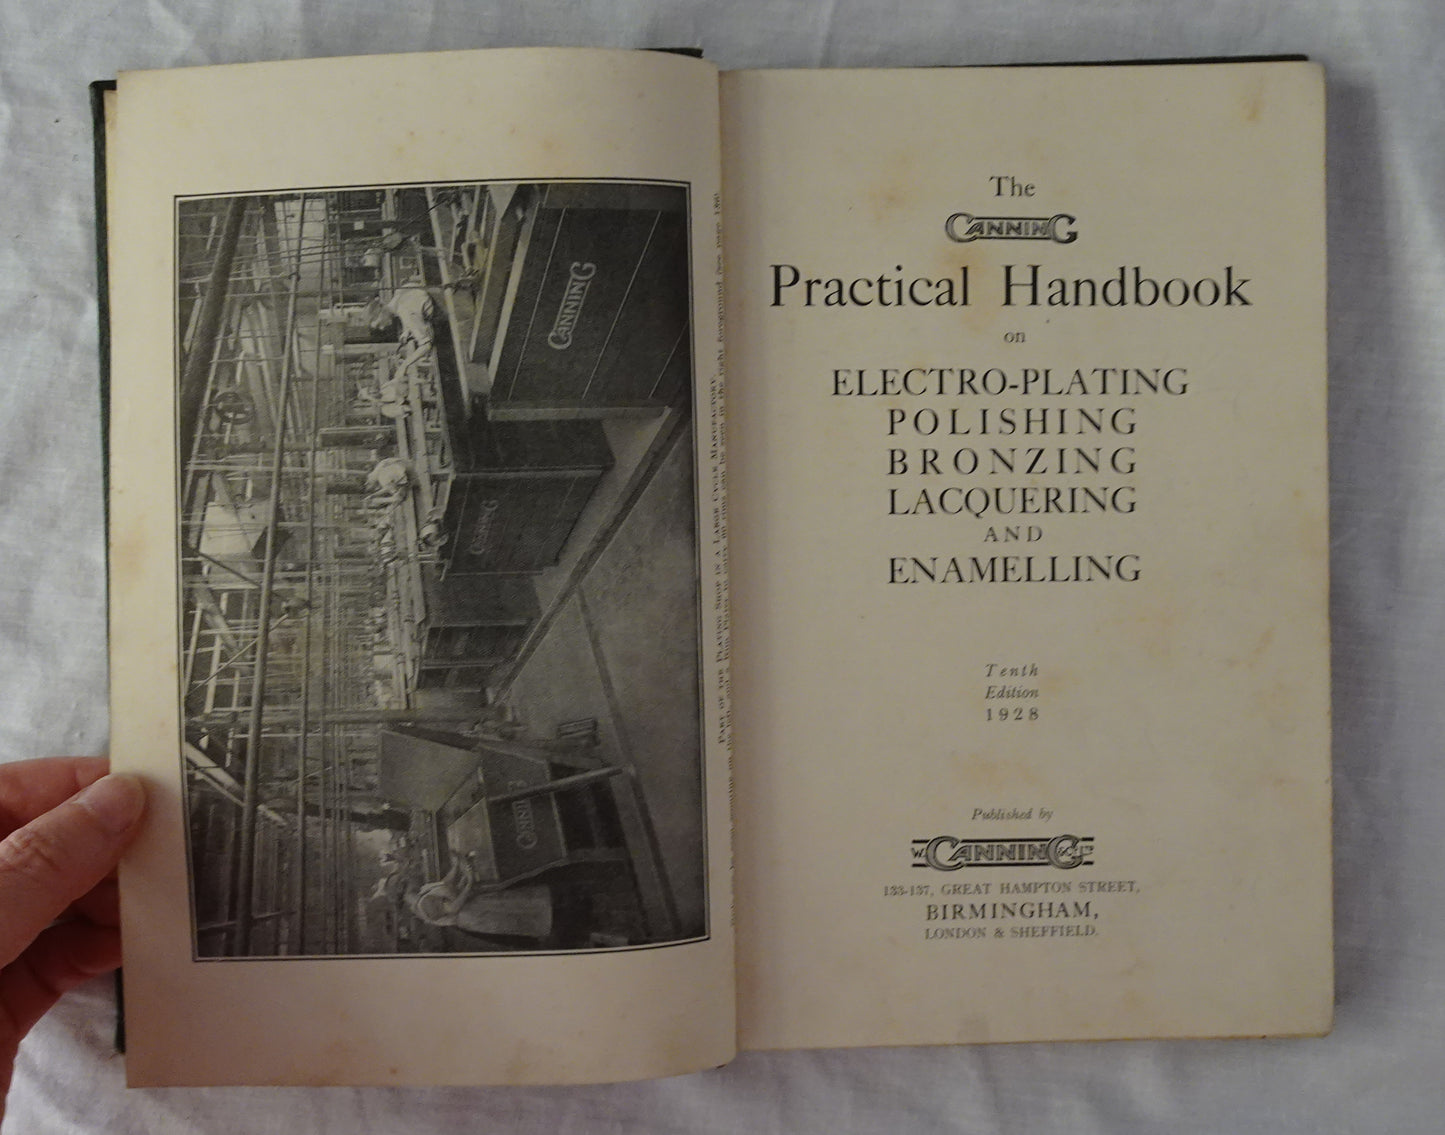 The Canning Practical Handbook on Electro-Plating